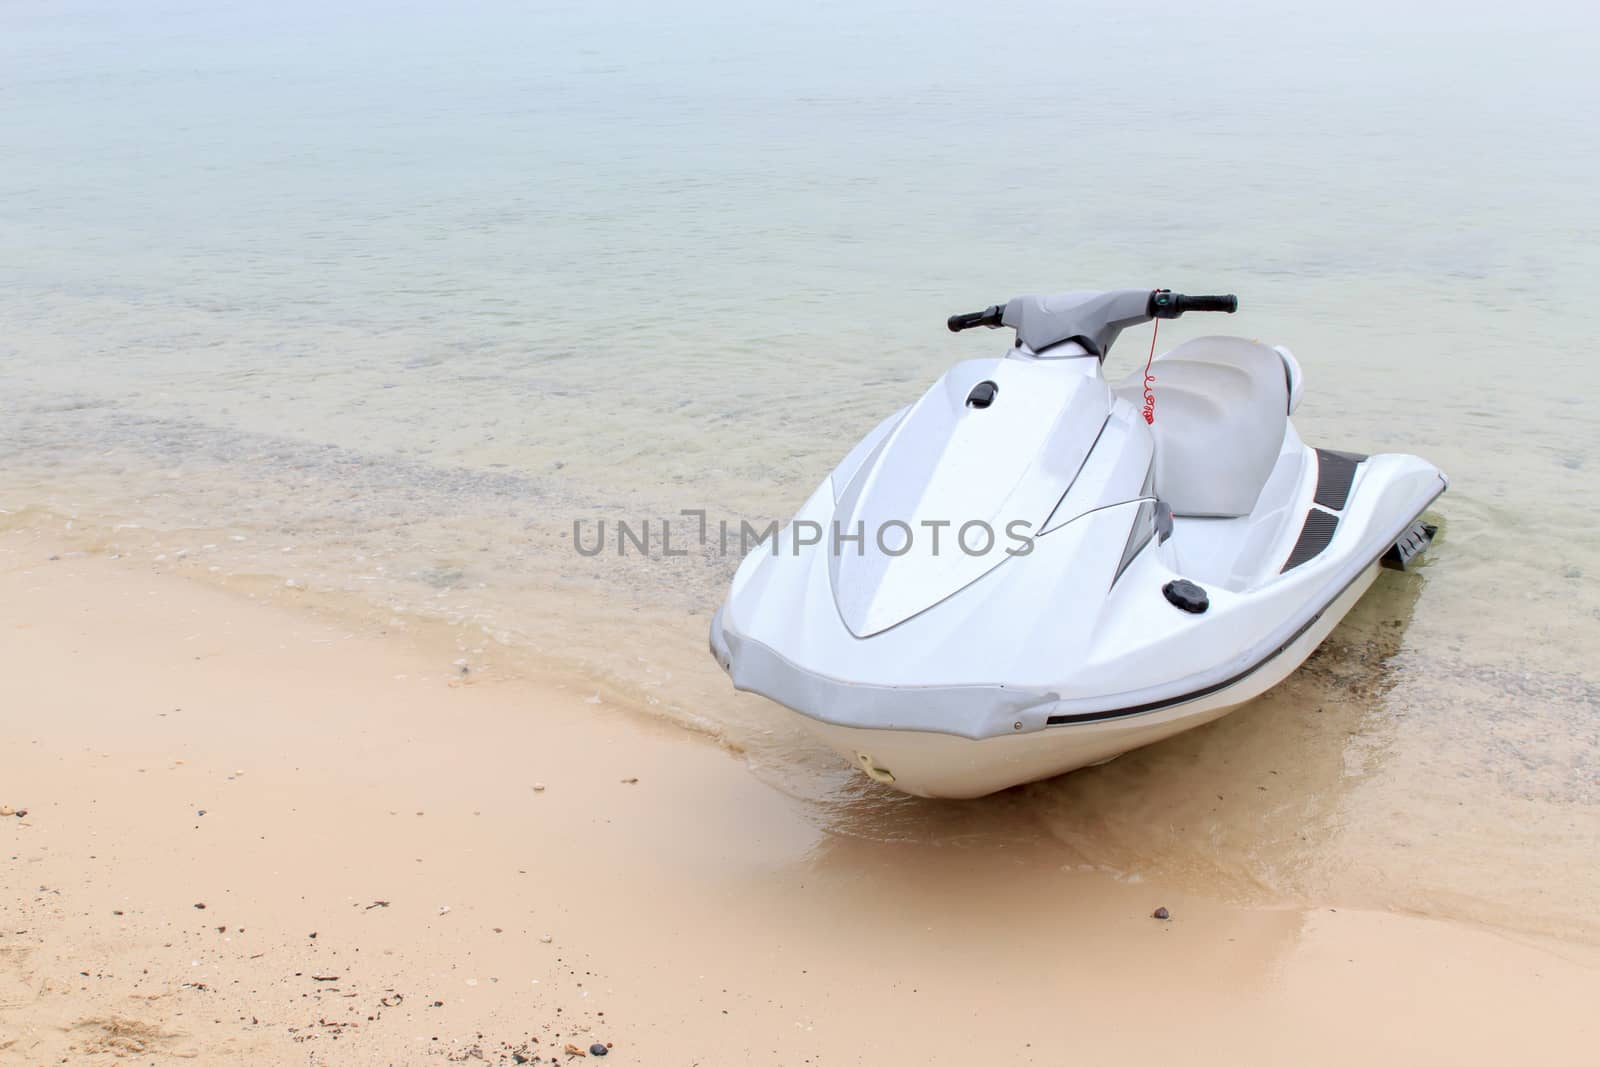 The jet ski parked on the beach.